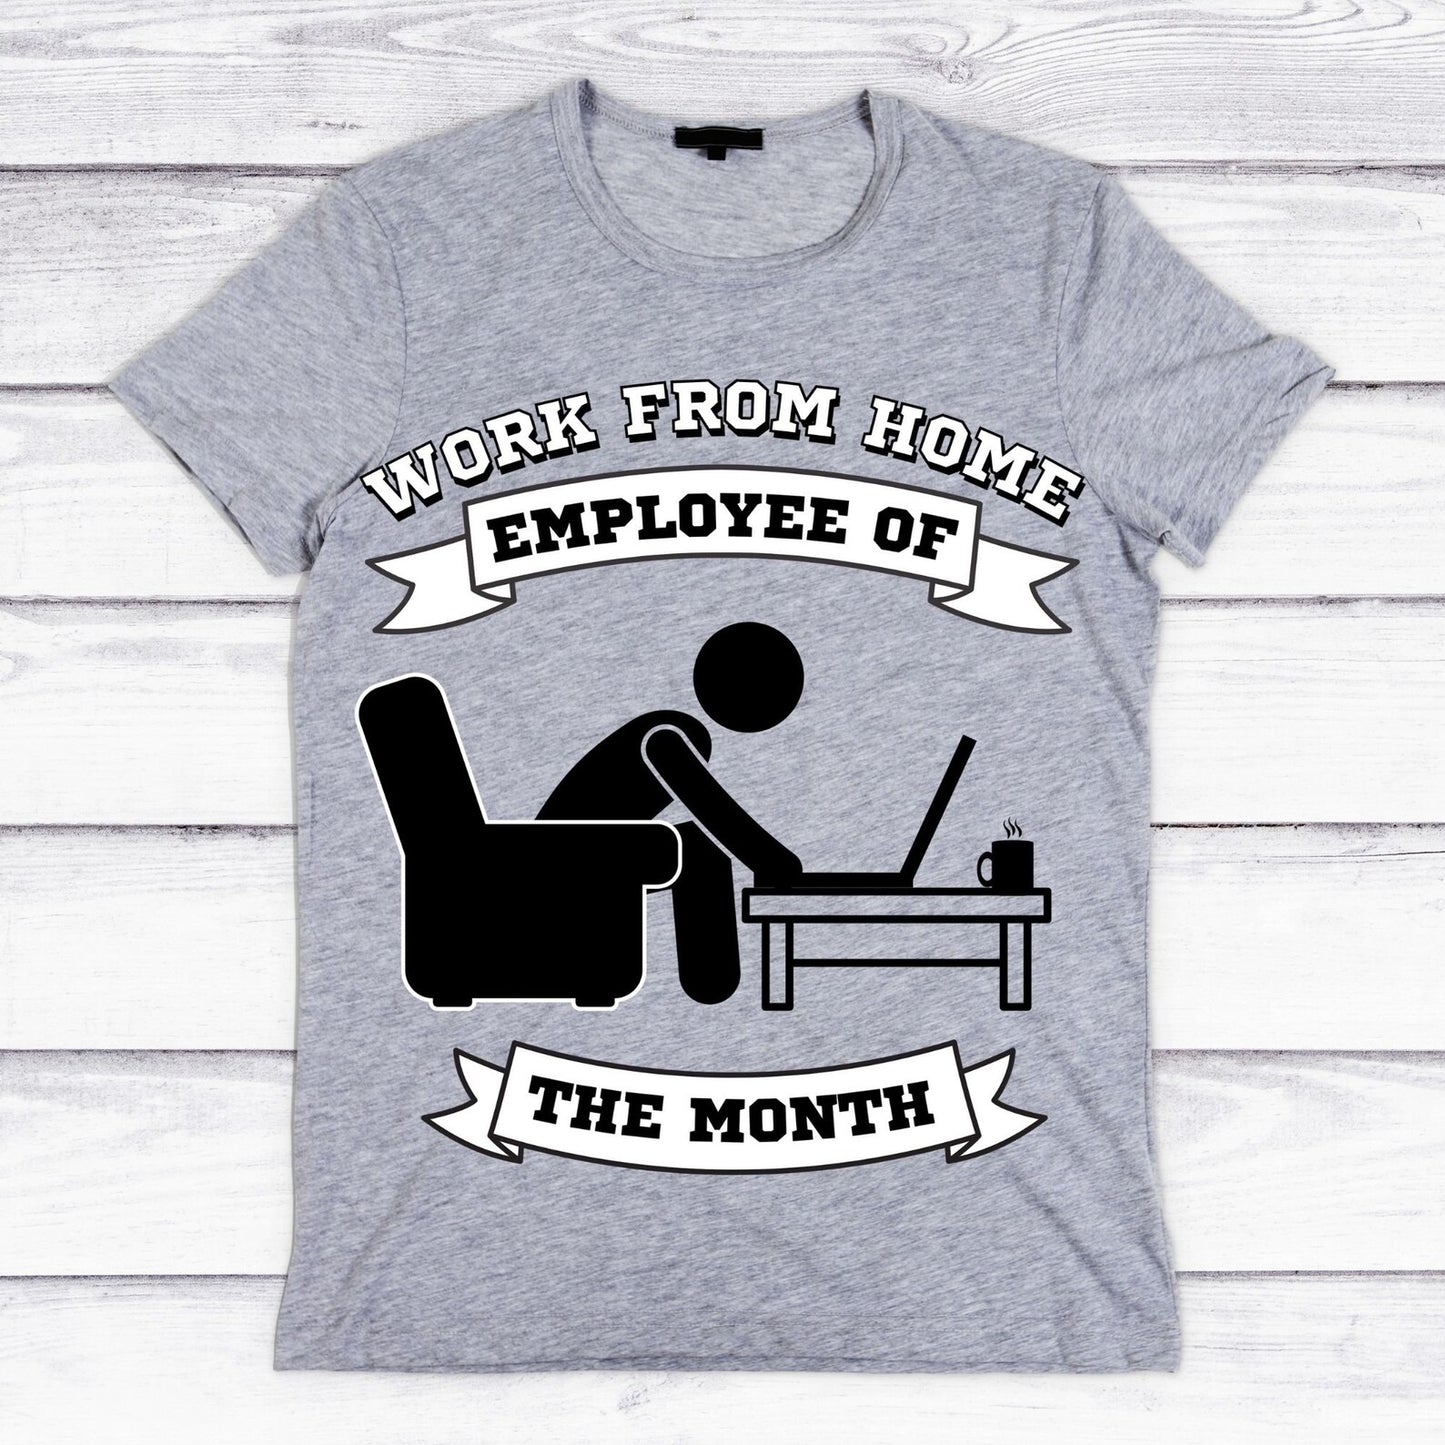 Employee of the Month TShirt